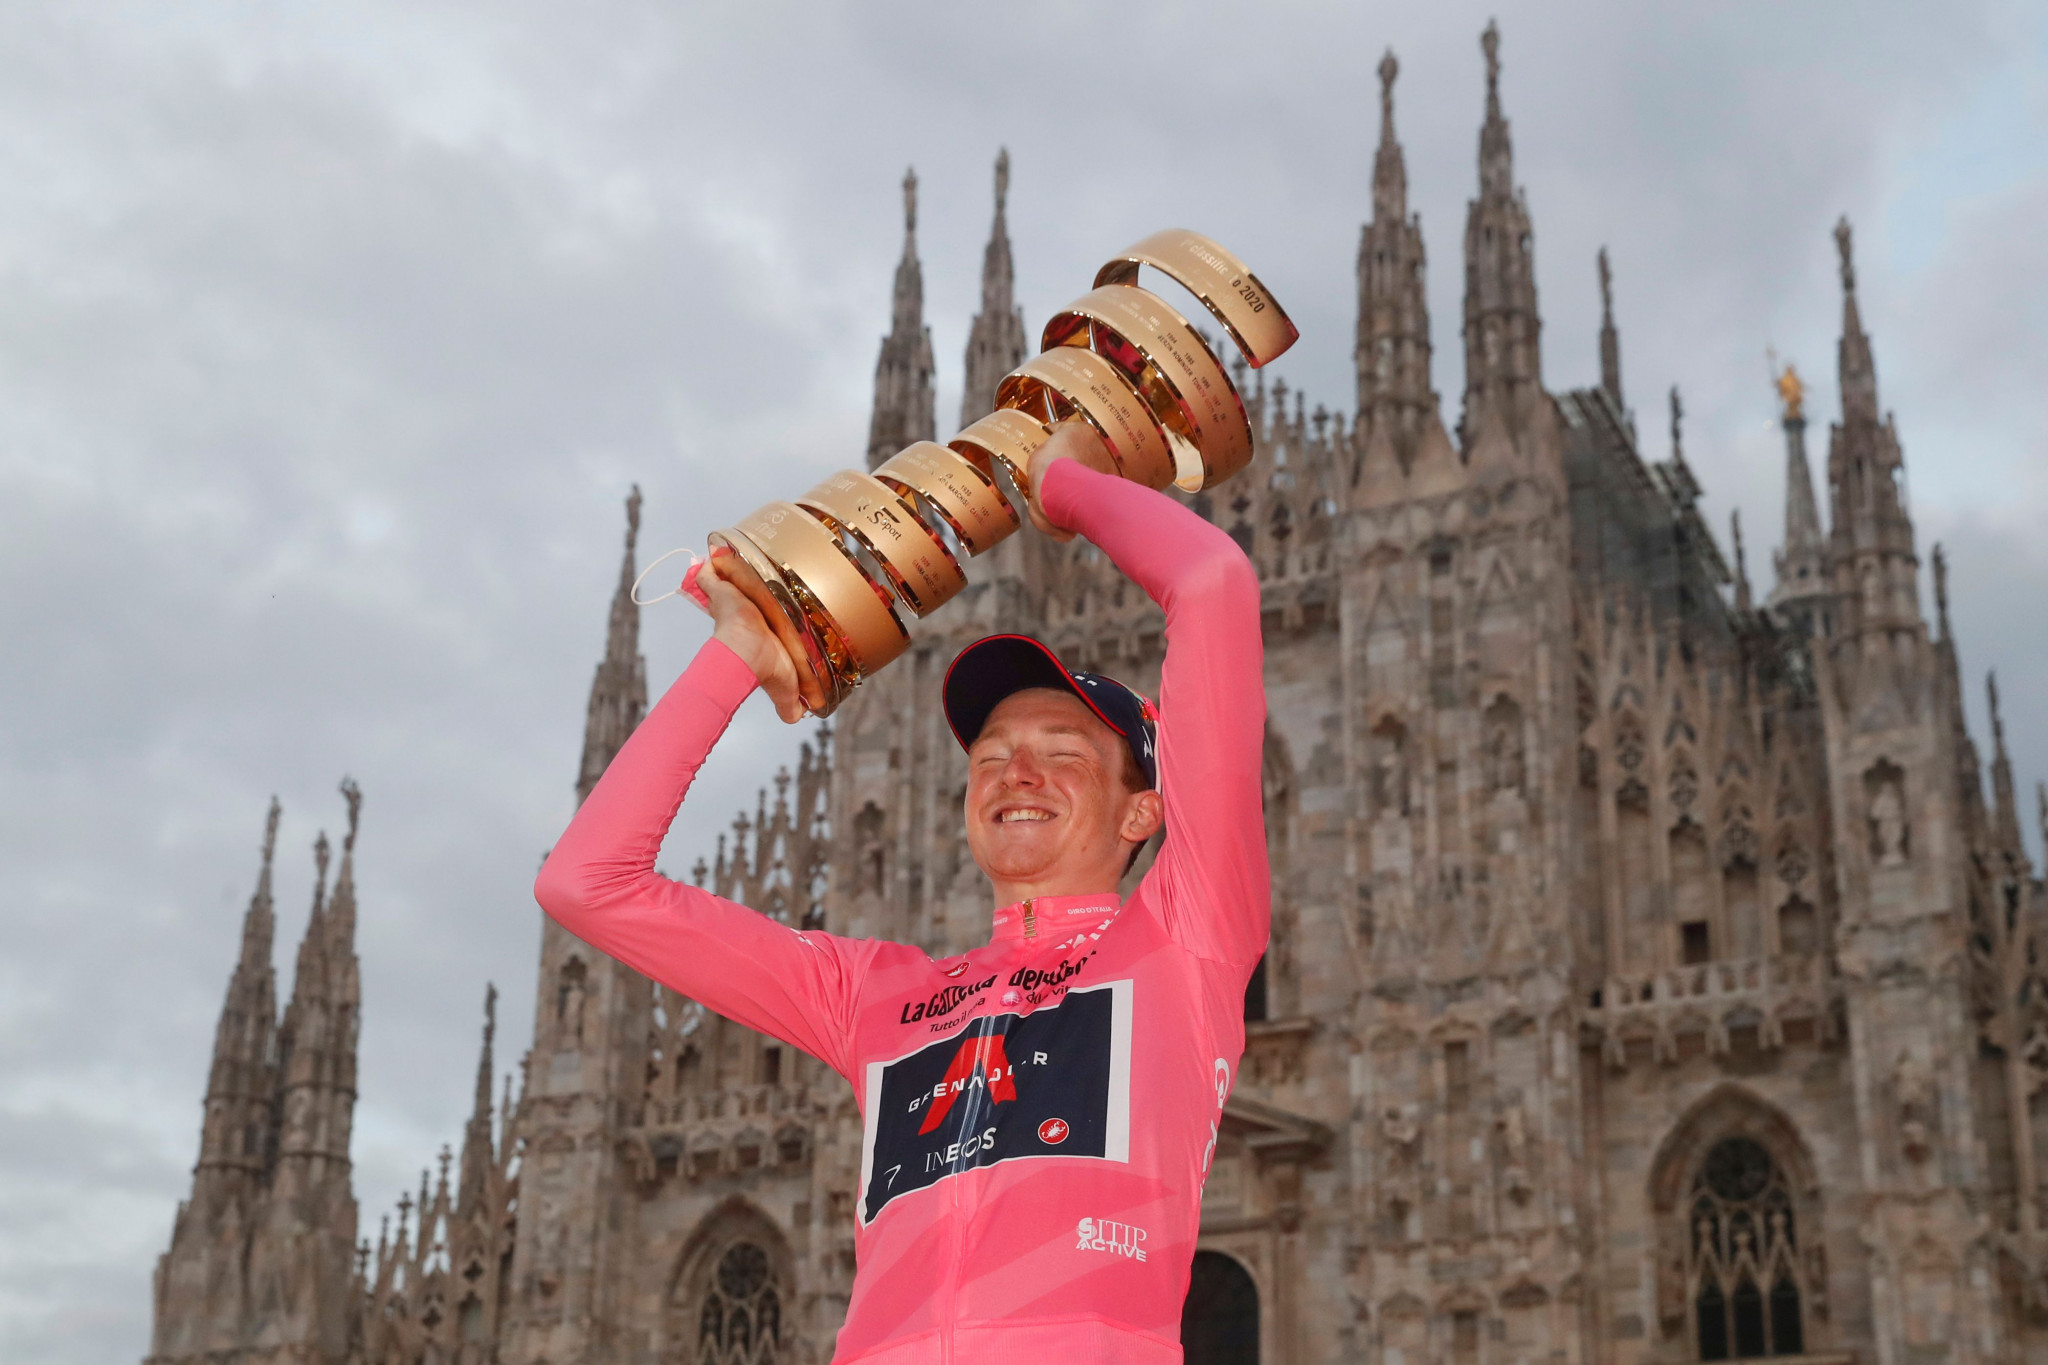 Geoghegan Hart wins Giro d'Italia after beating rival Hindley in final time trial